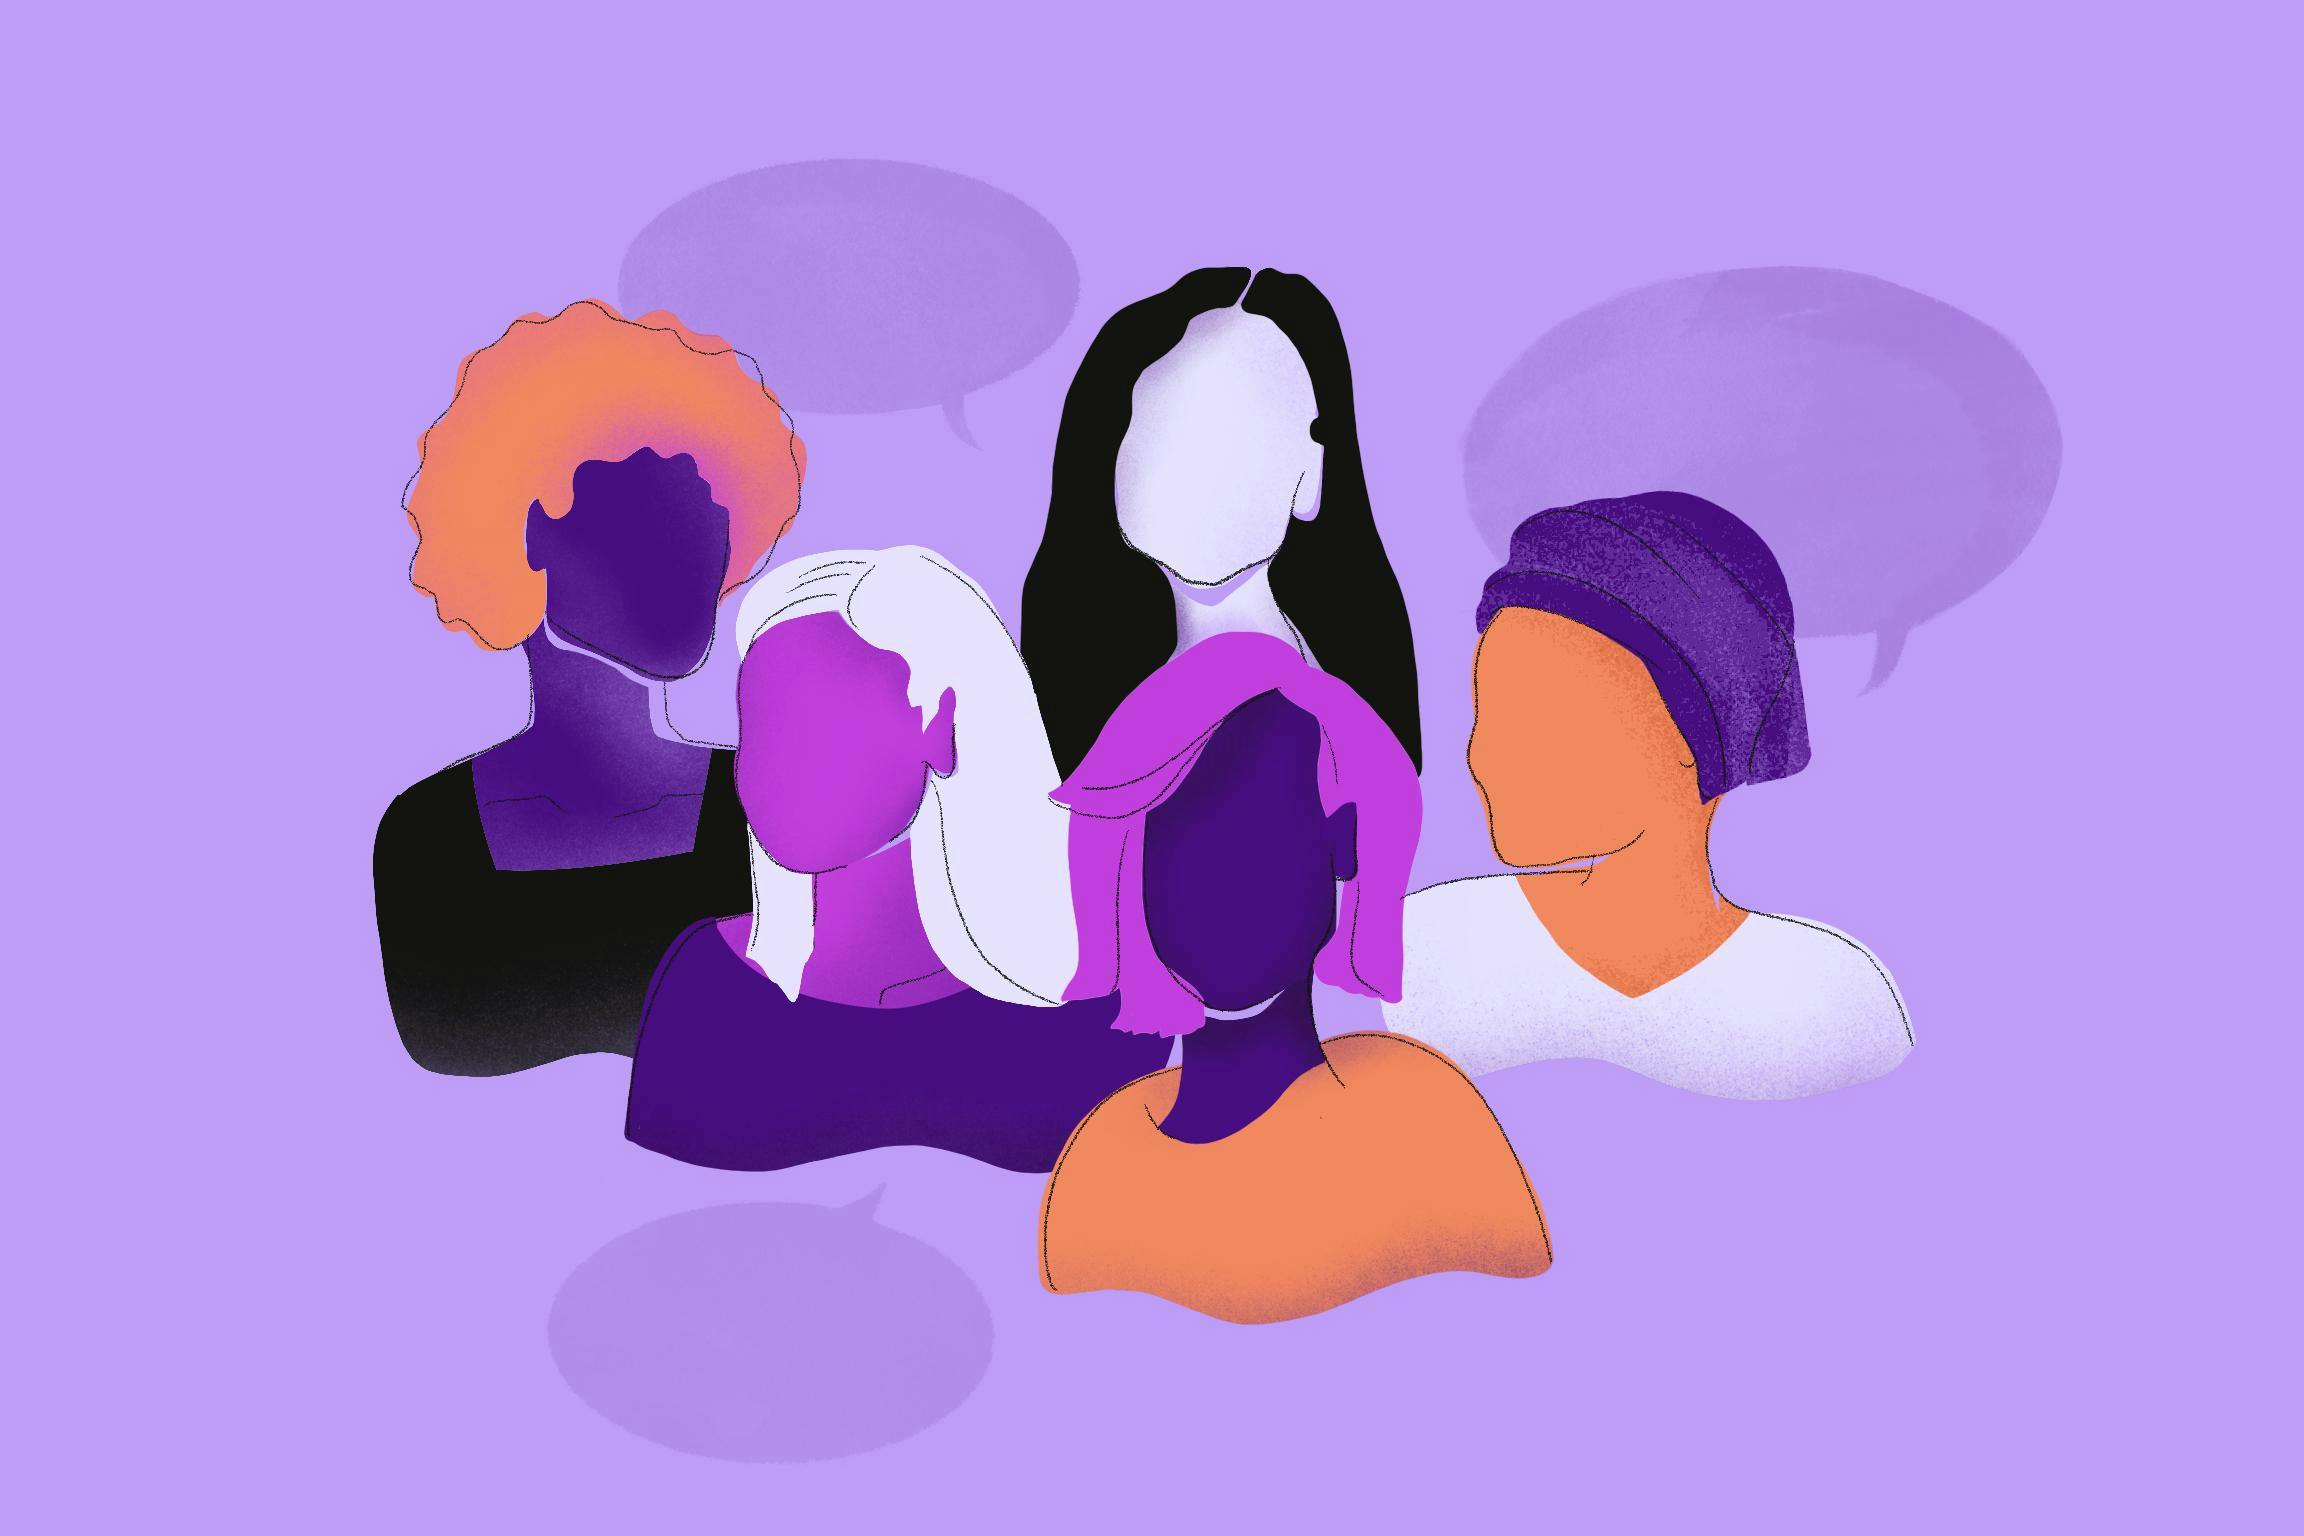 An illustration showing a diverse group of people coming together